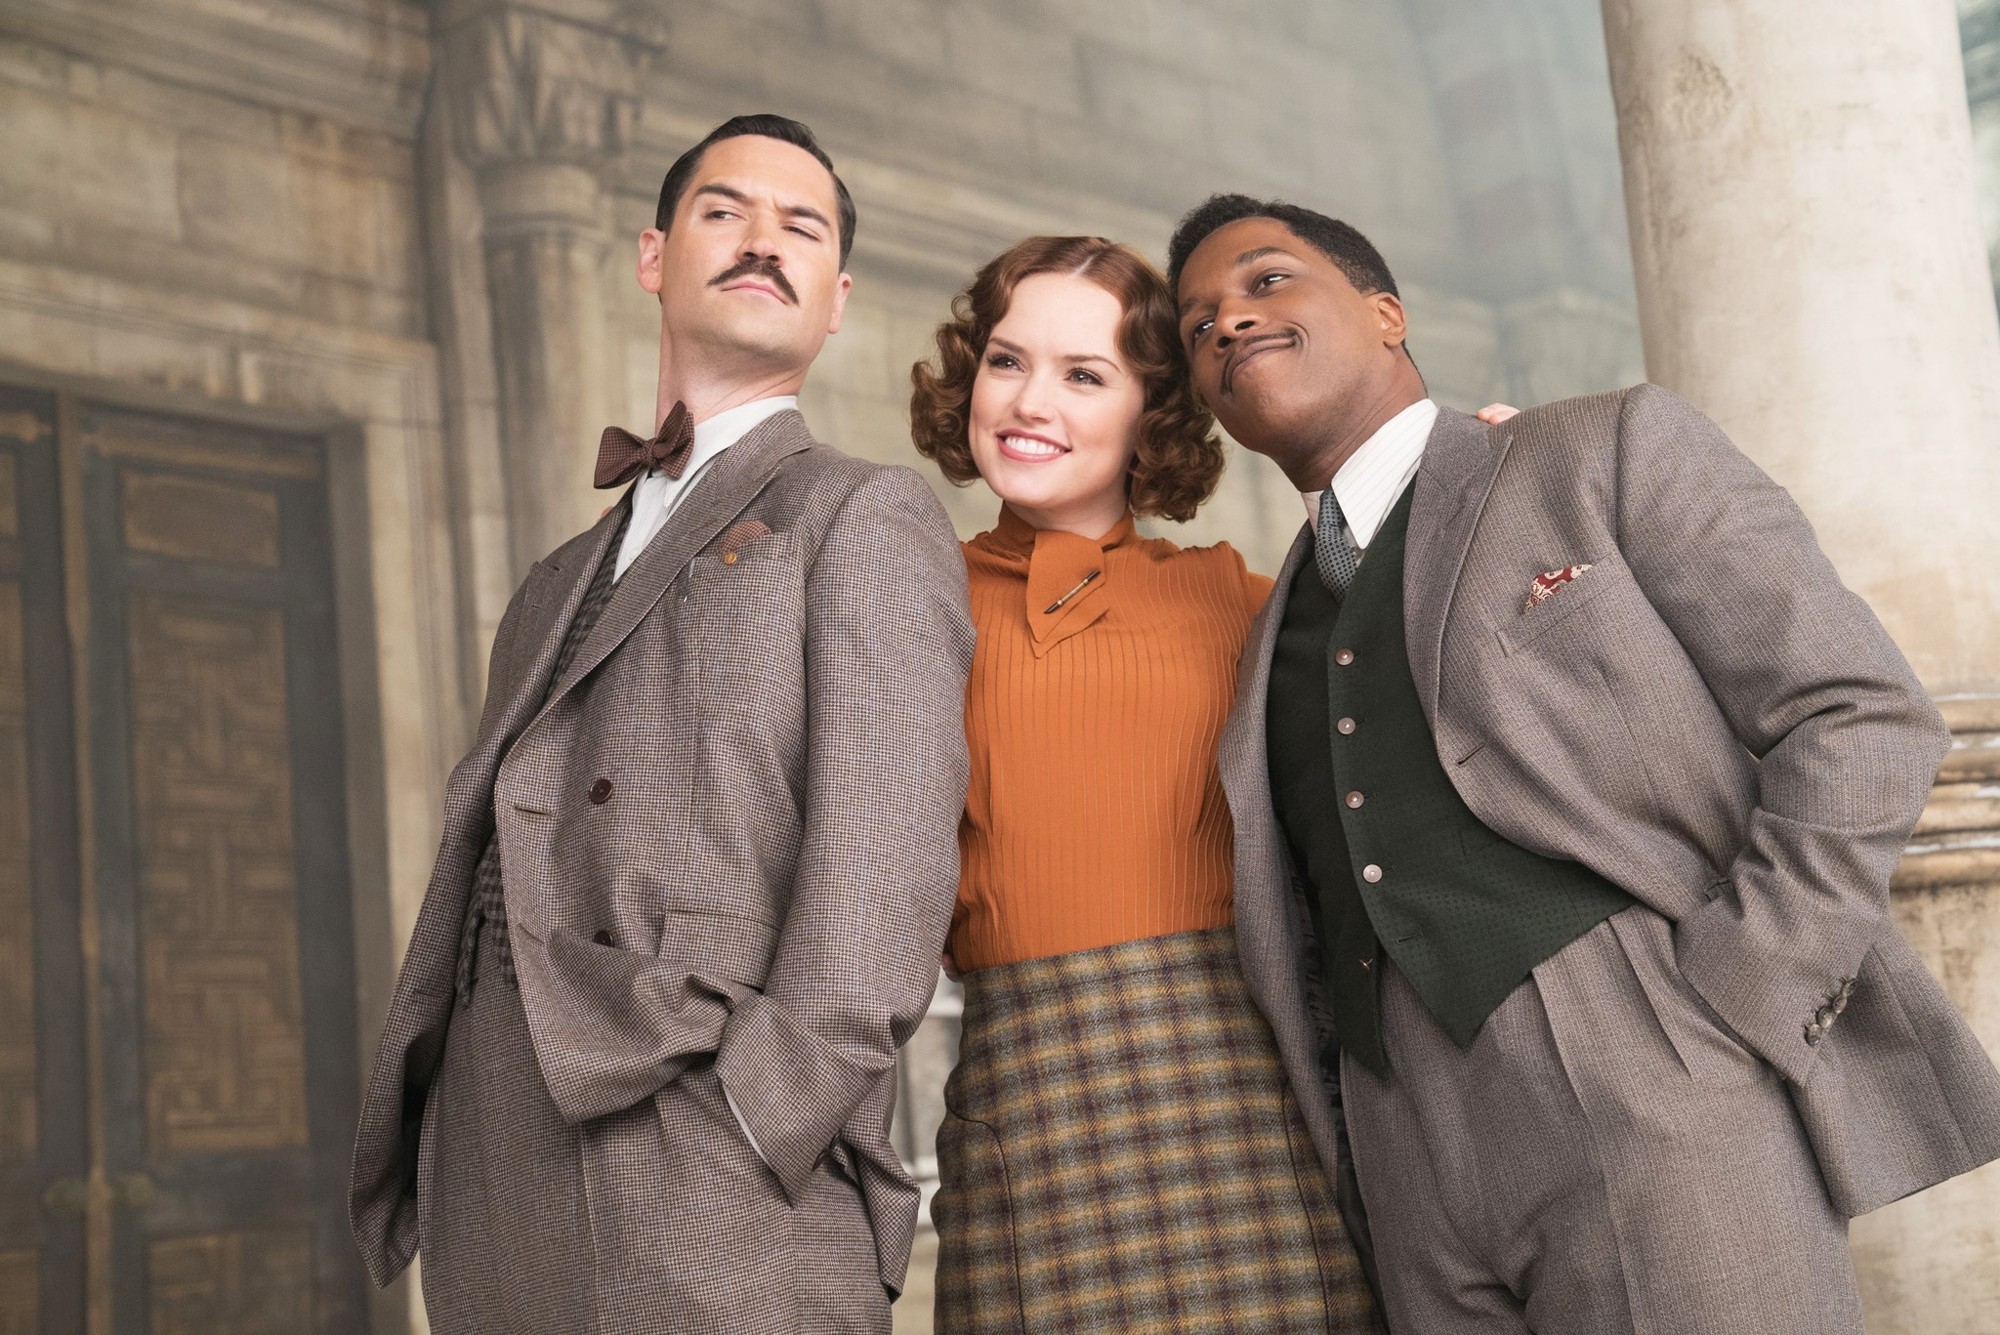 Tom Bateman, Daisy Ridley and Leslie Odom Jr. in 20th Century Fox's Murder on the Orient Express (2017)